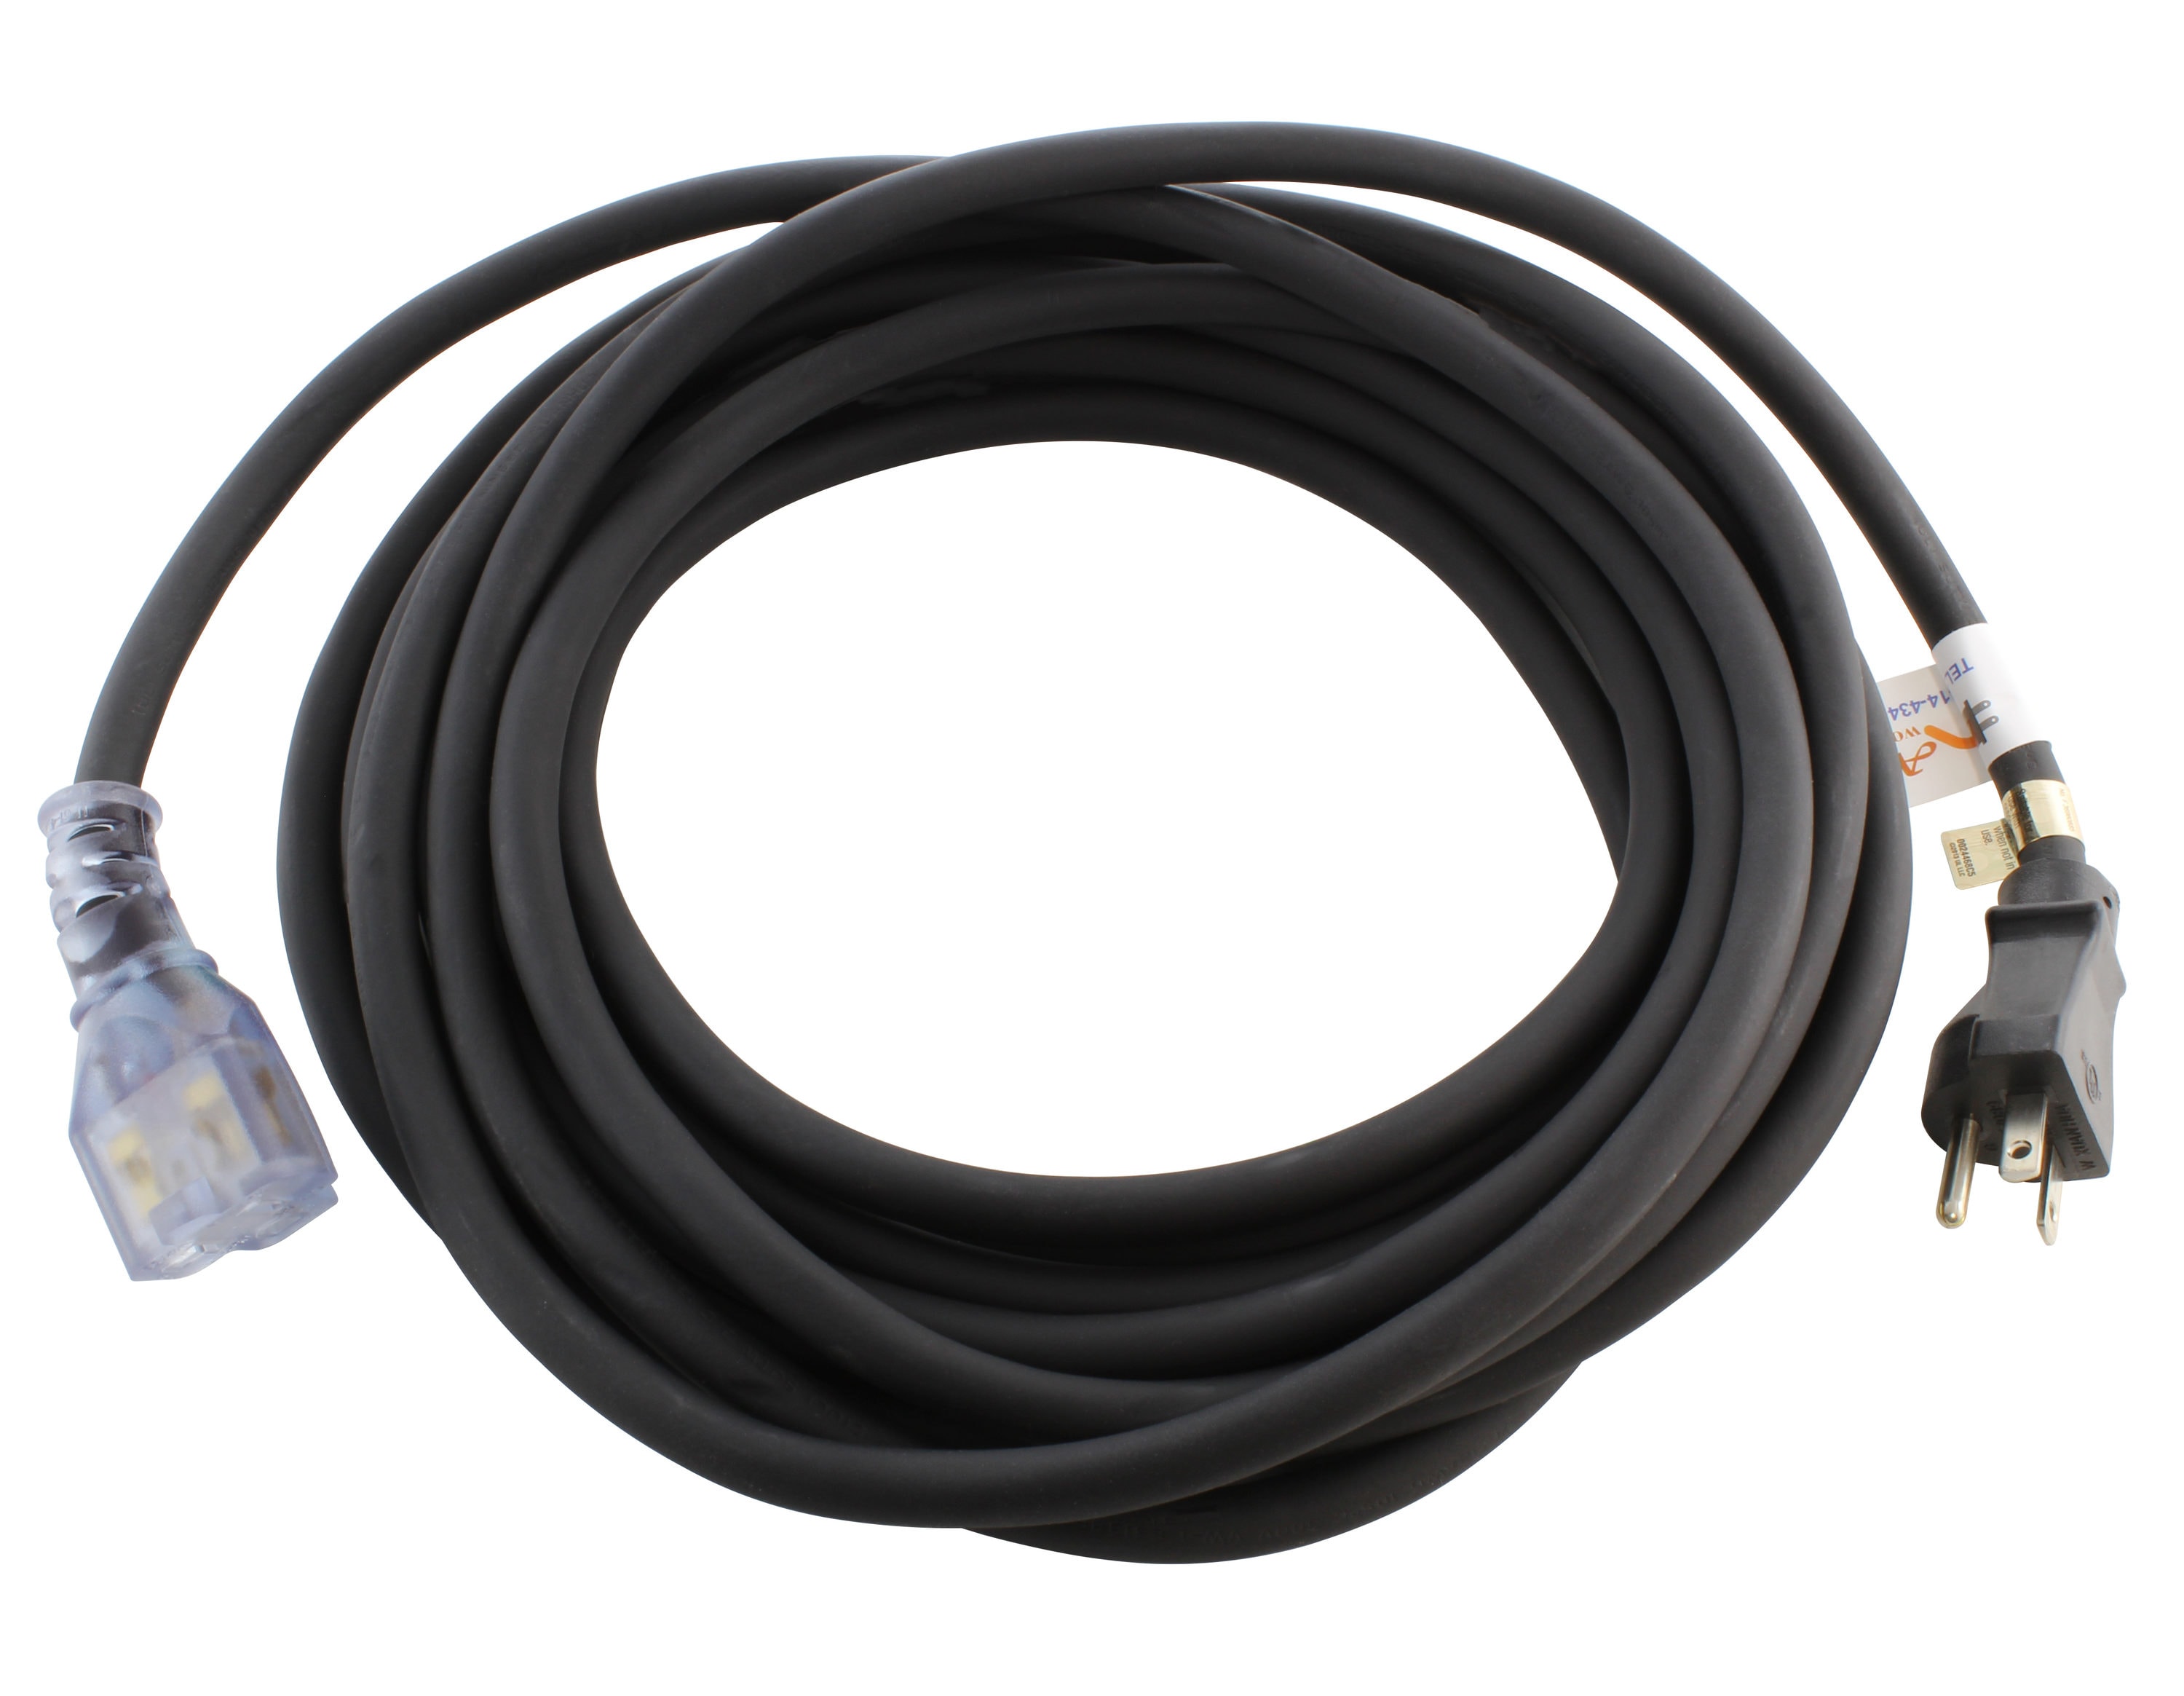 Set Of Twelve 25-inch Cord Covers – 300-inch Total On-wall Cable